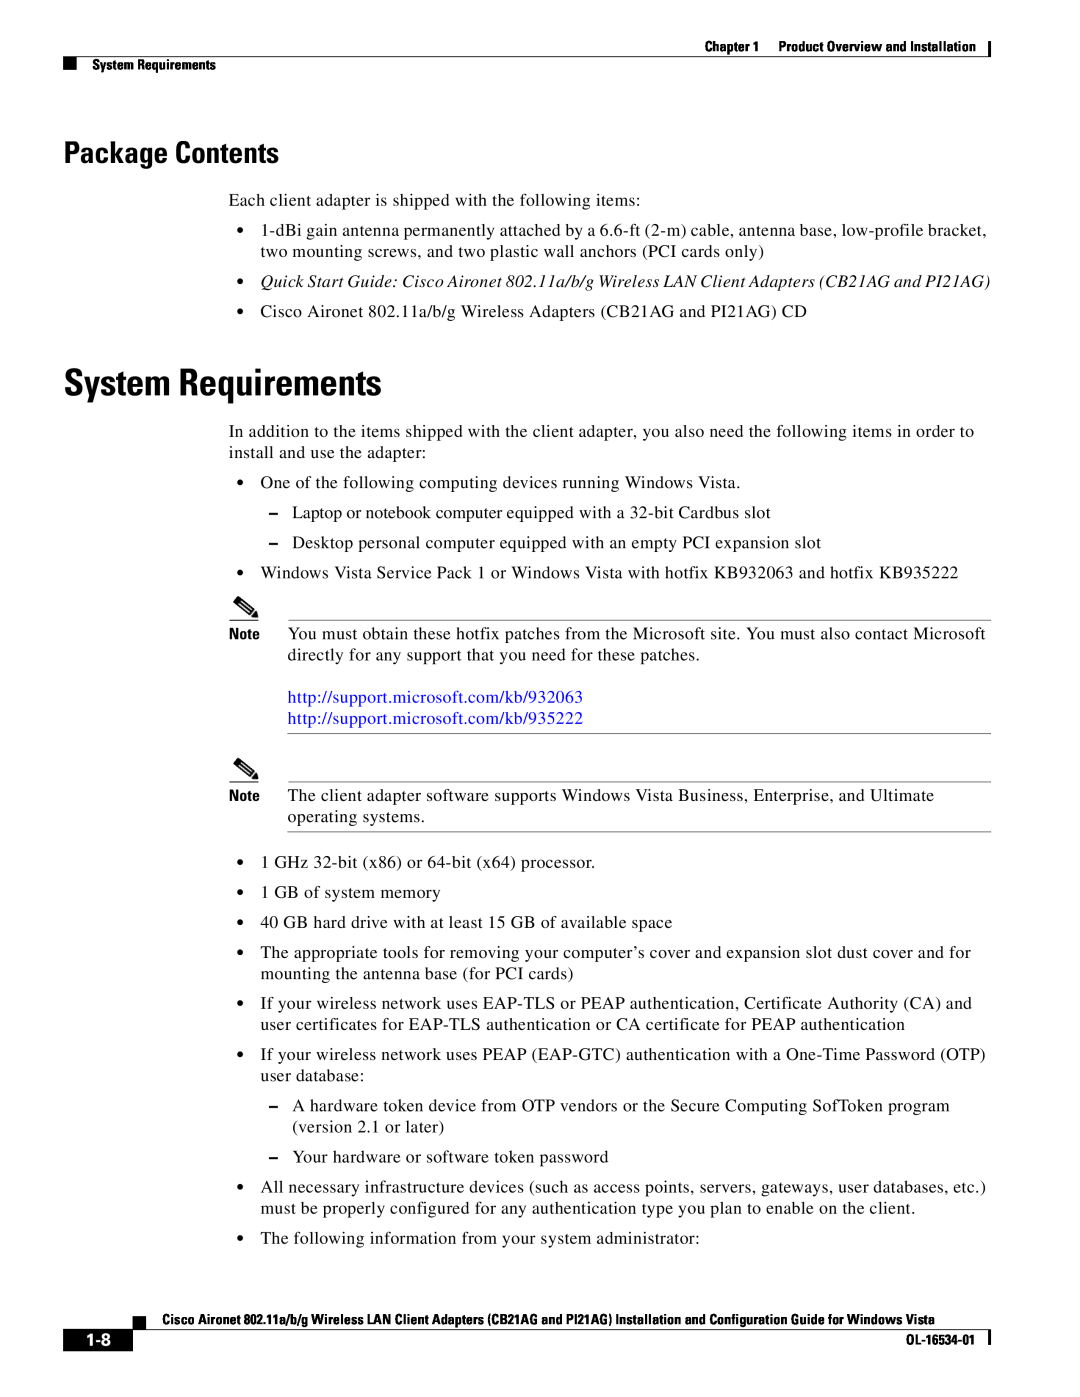 Cisco Systems PI21AG, CB21AG manual System Requirements, Package Contents, http//support.microsoft.com/kb/932063 